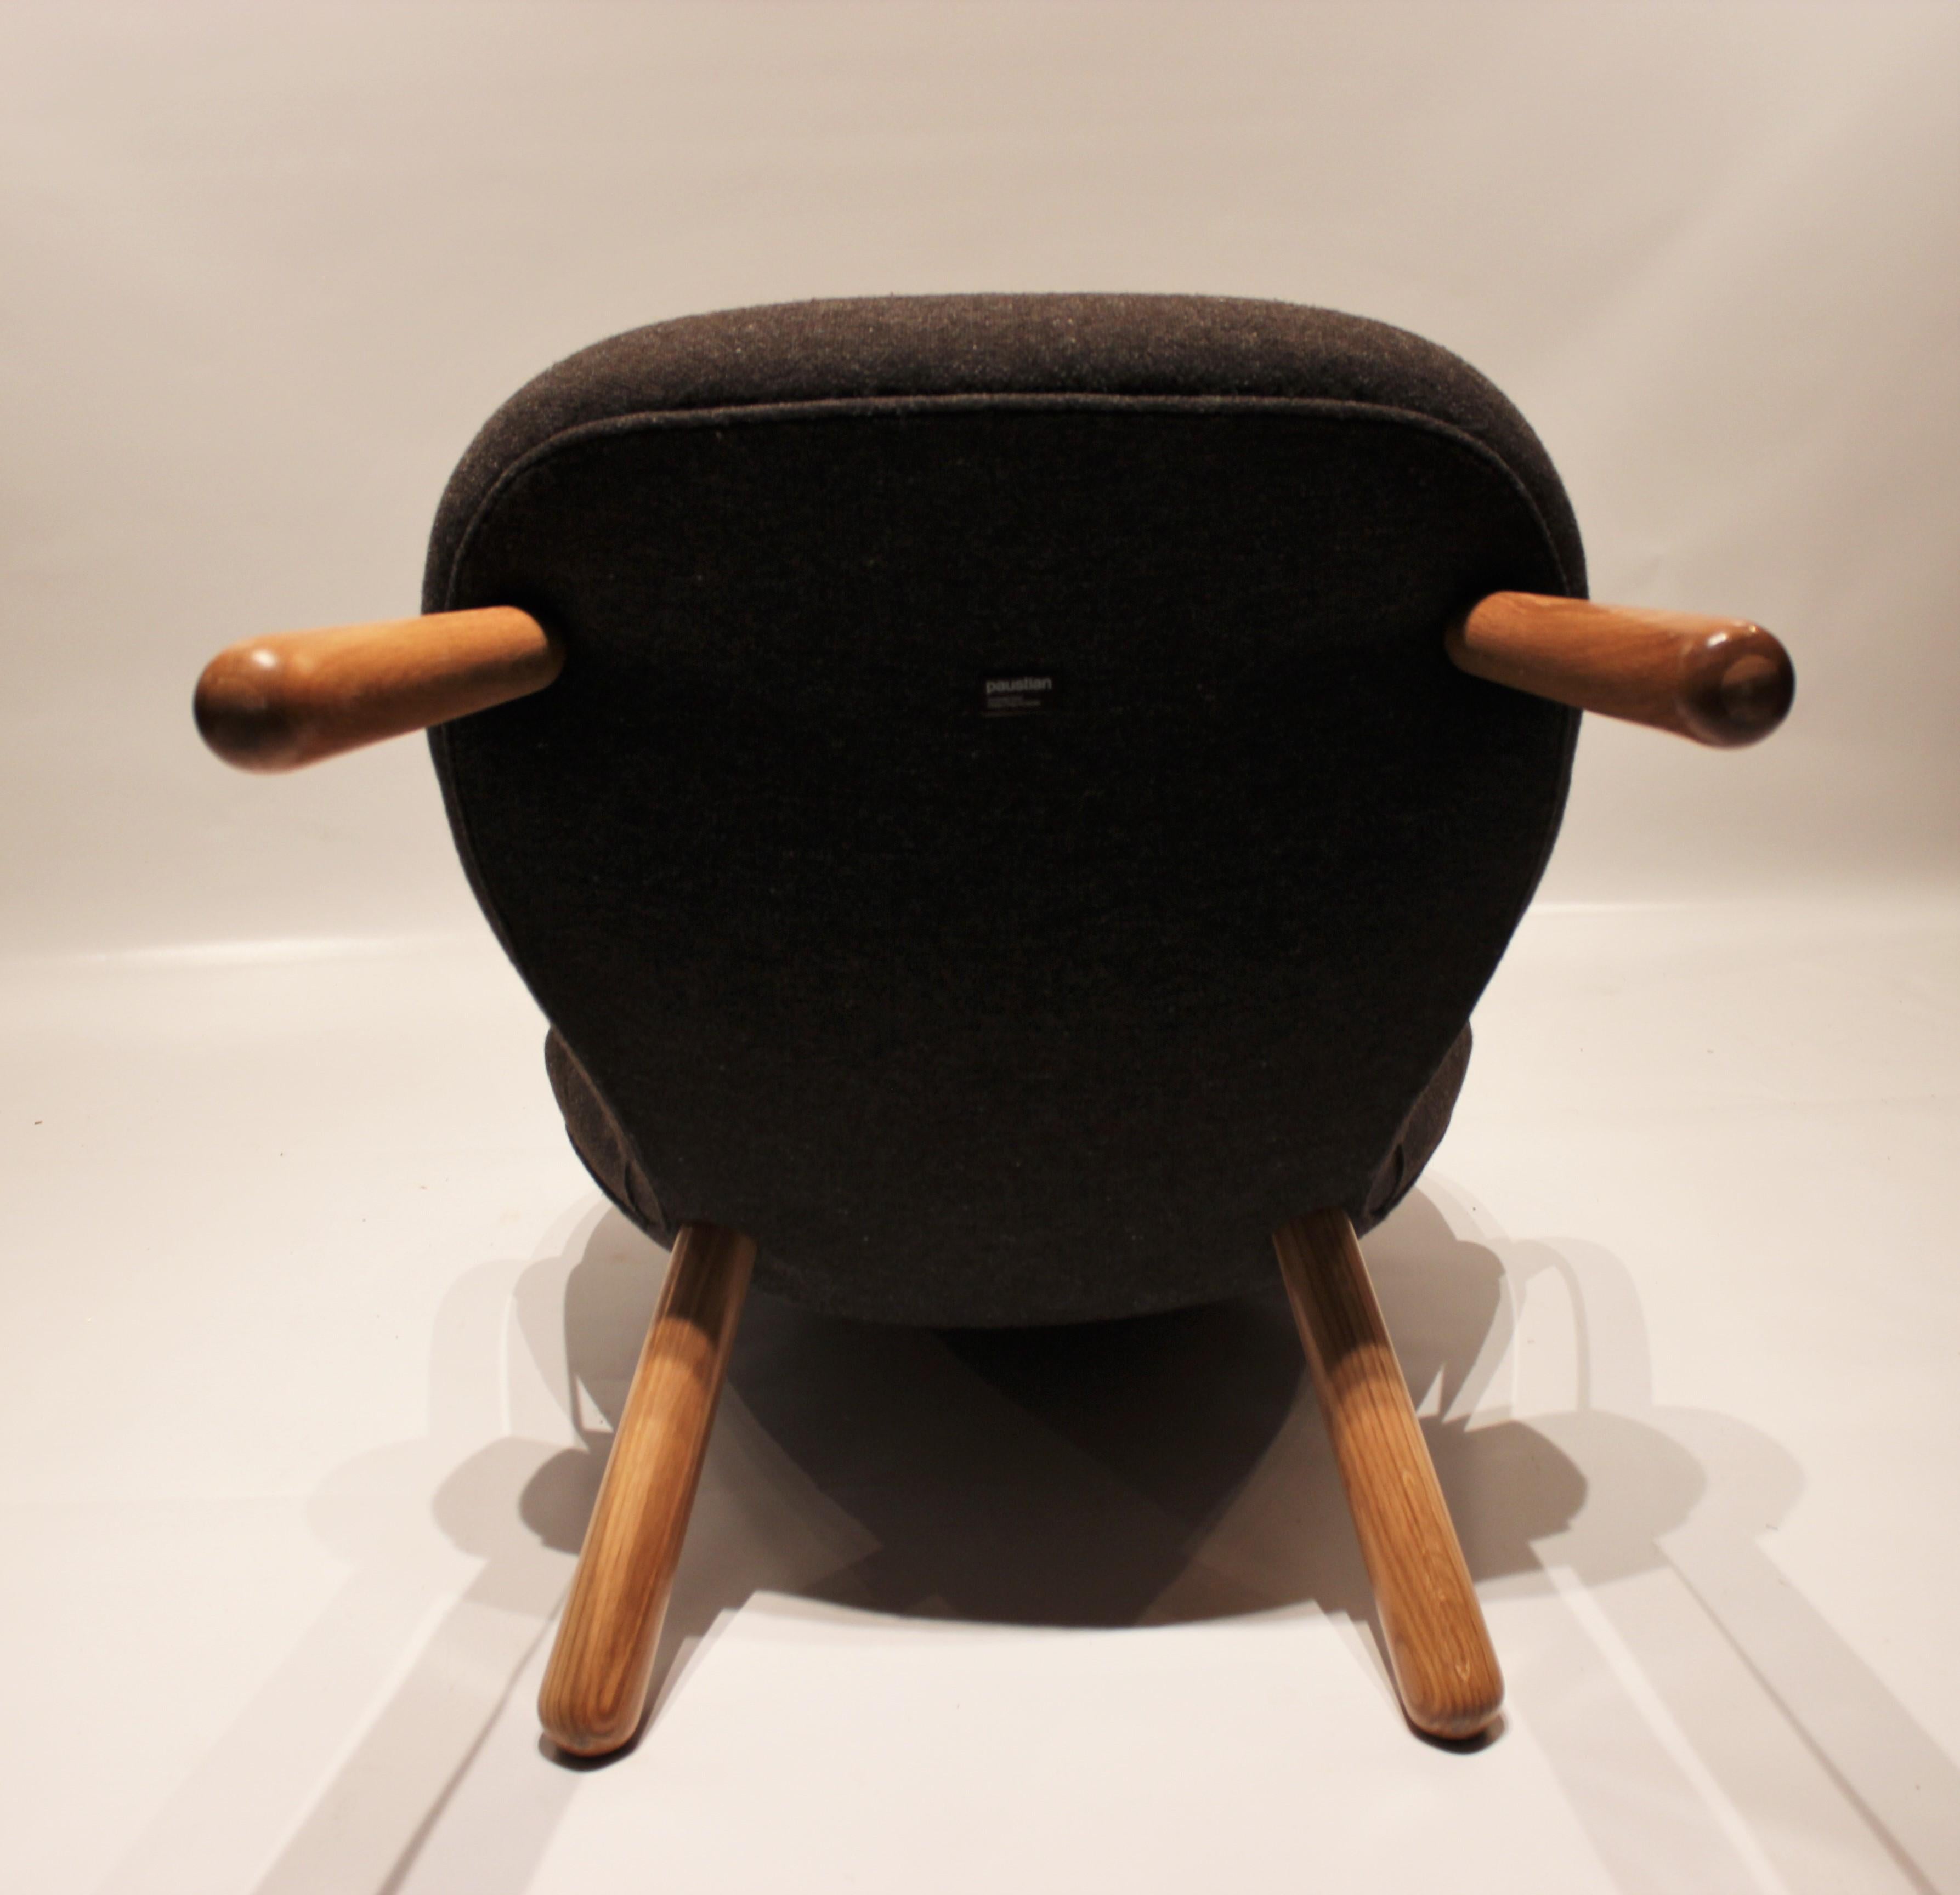 Wool The Clam Chair Originally Designed by Phillip Arctander in 1944